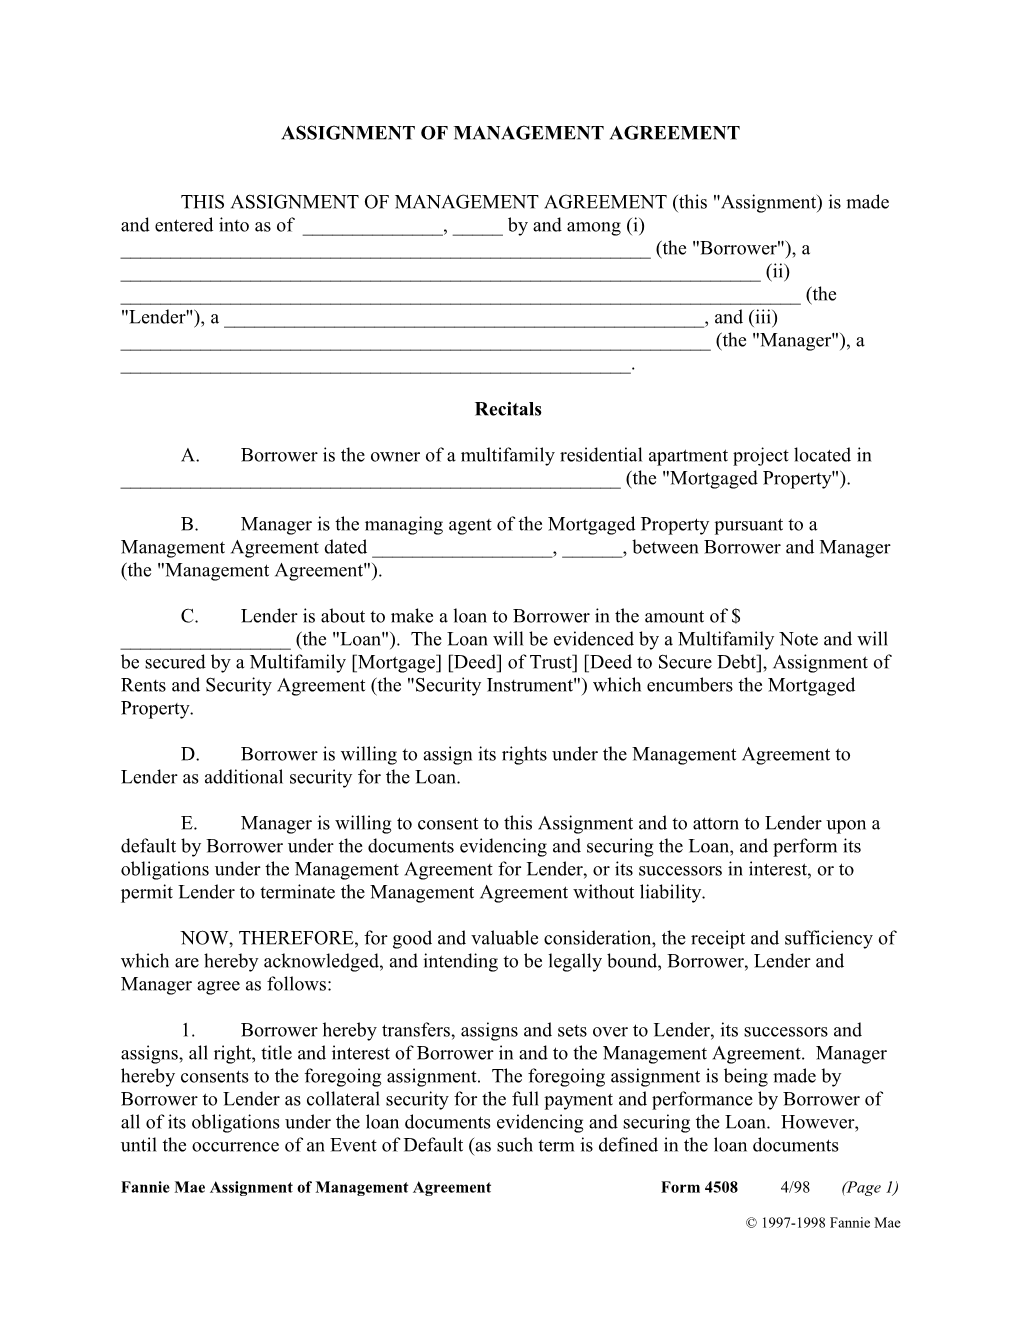 Assignment of Management Agreement